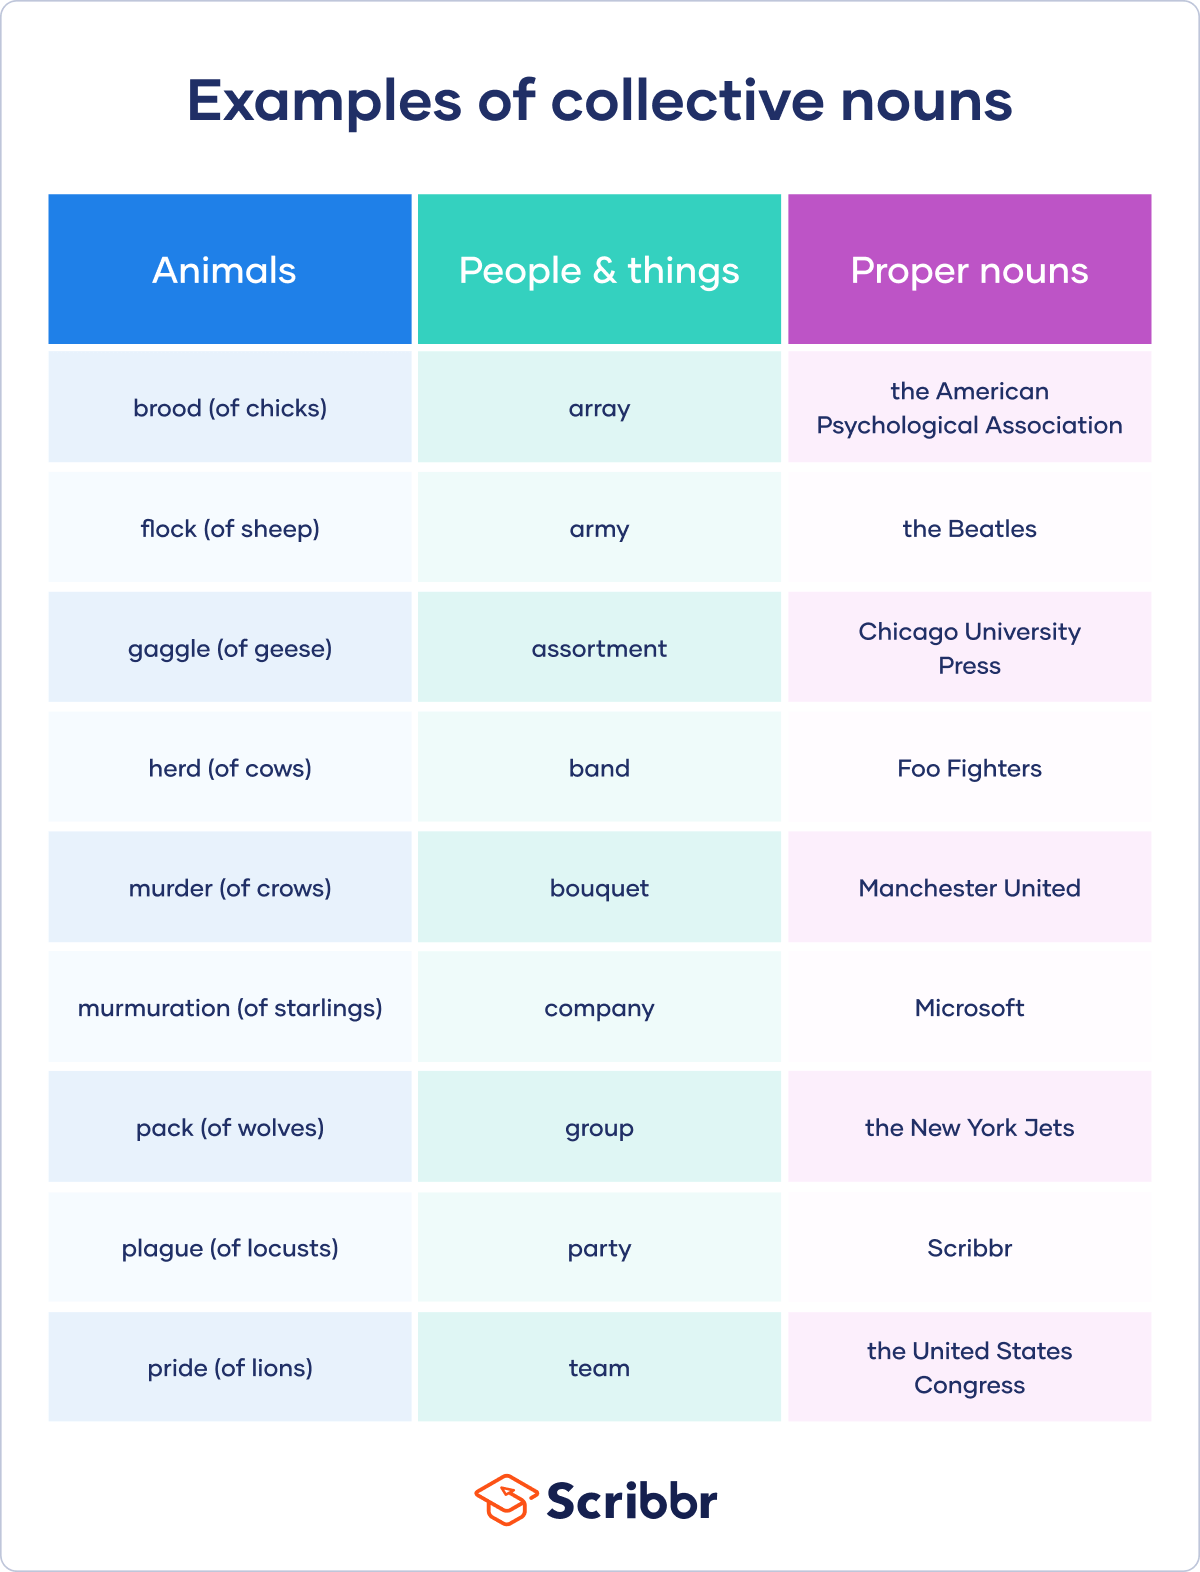 Examples of collective nouns